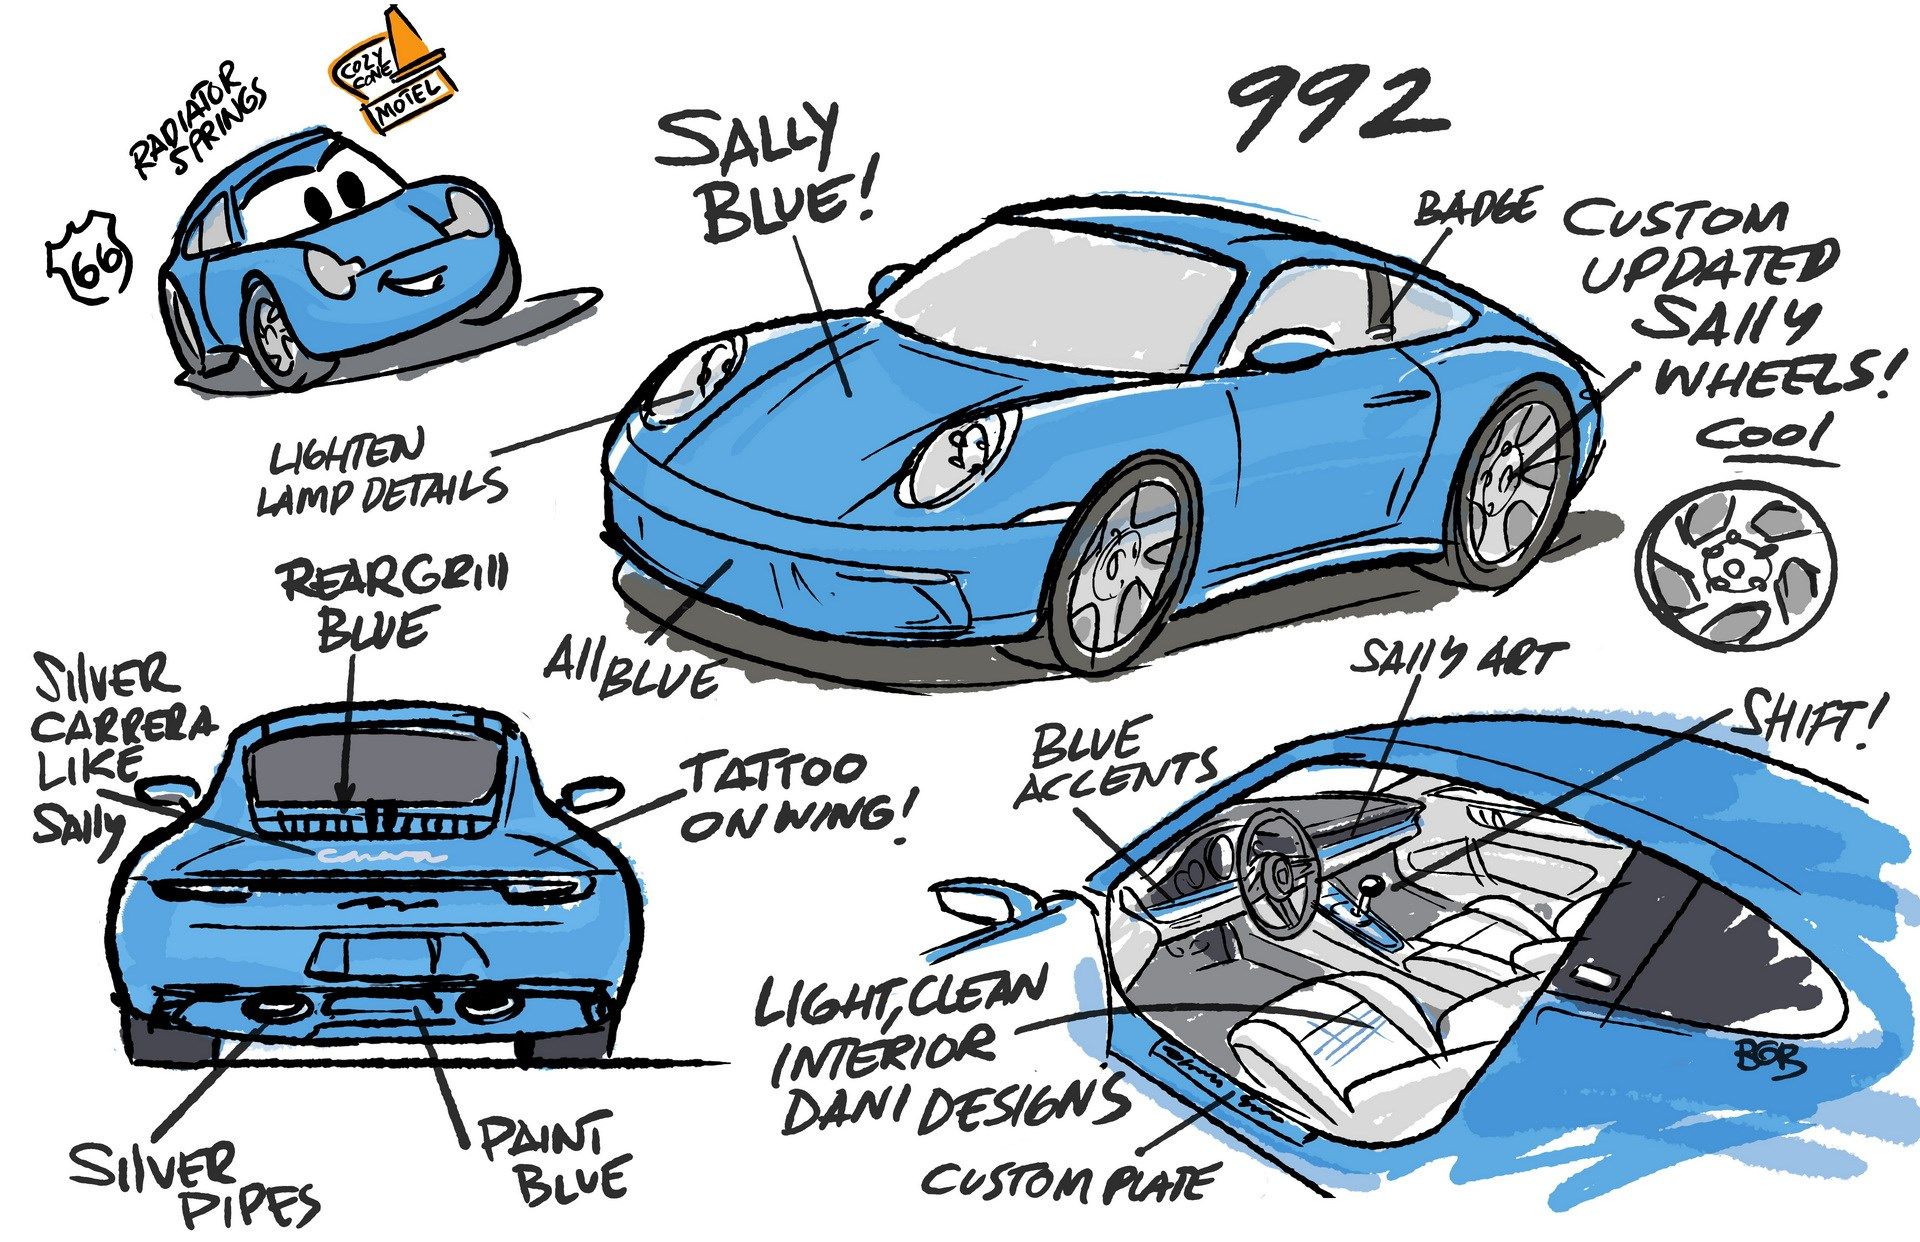 Porsche, Pixar are building a real-life 'Sally' from Cars for charity